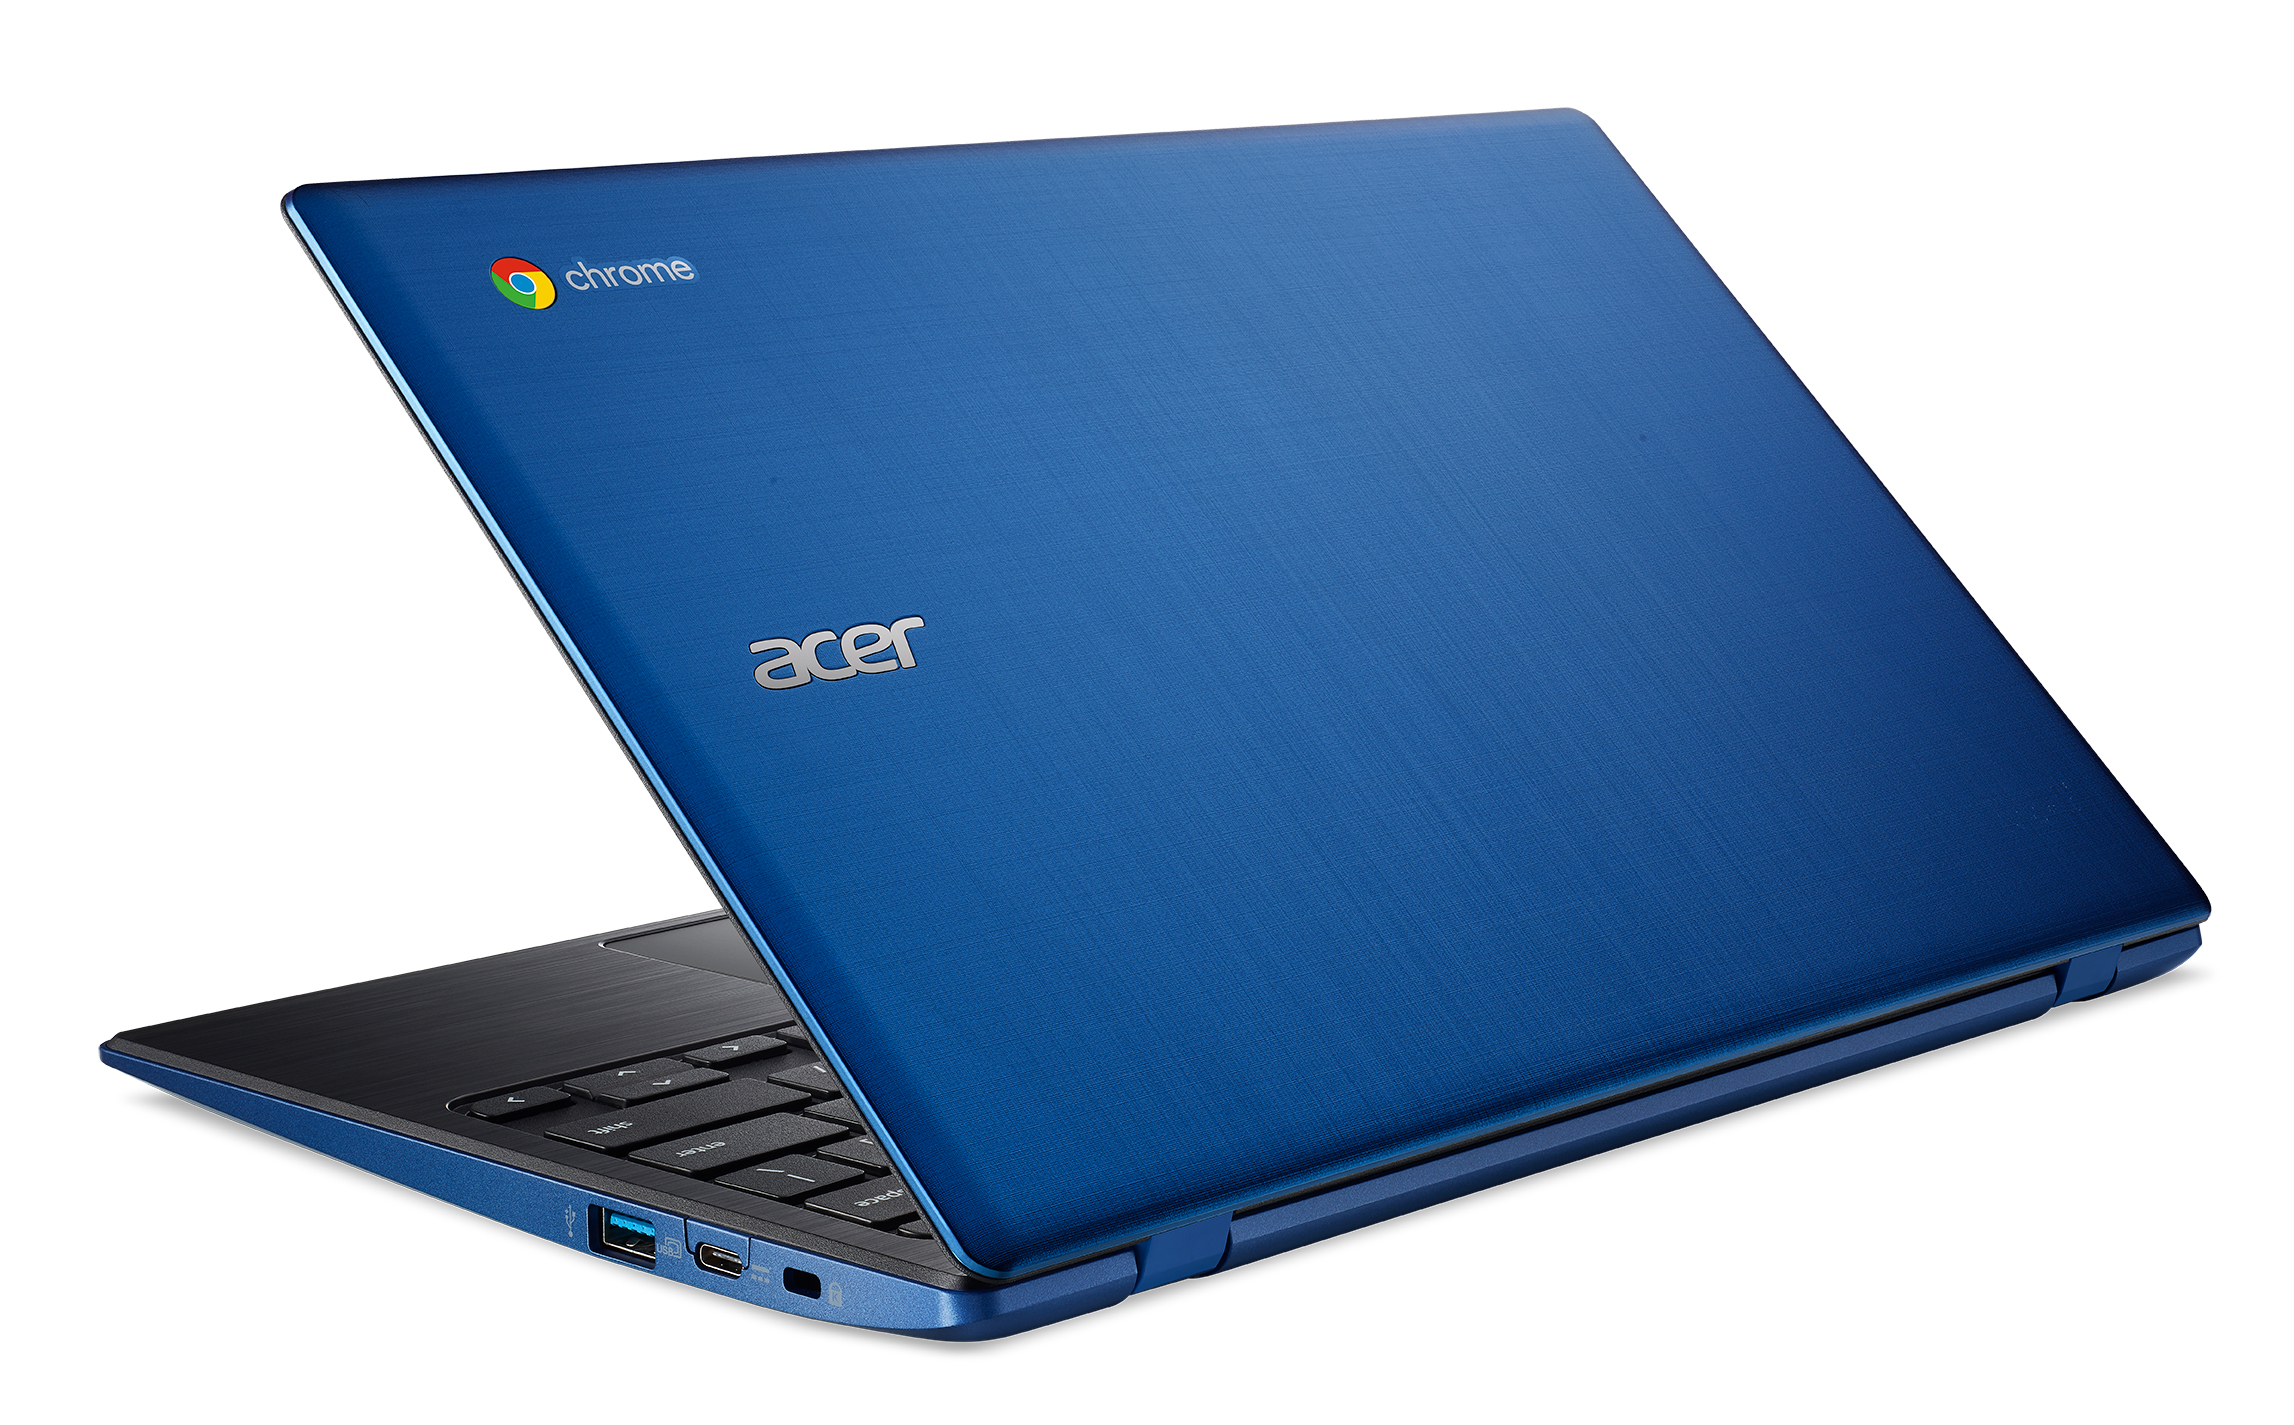 acer laptop swift 7 news ces 2018 chromebook 11  cb311 8h and 8ht 01